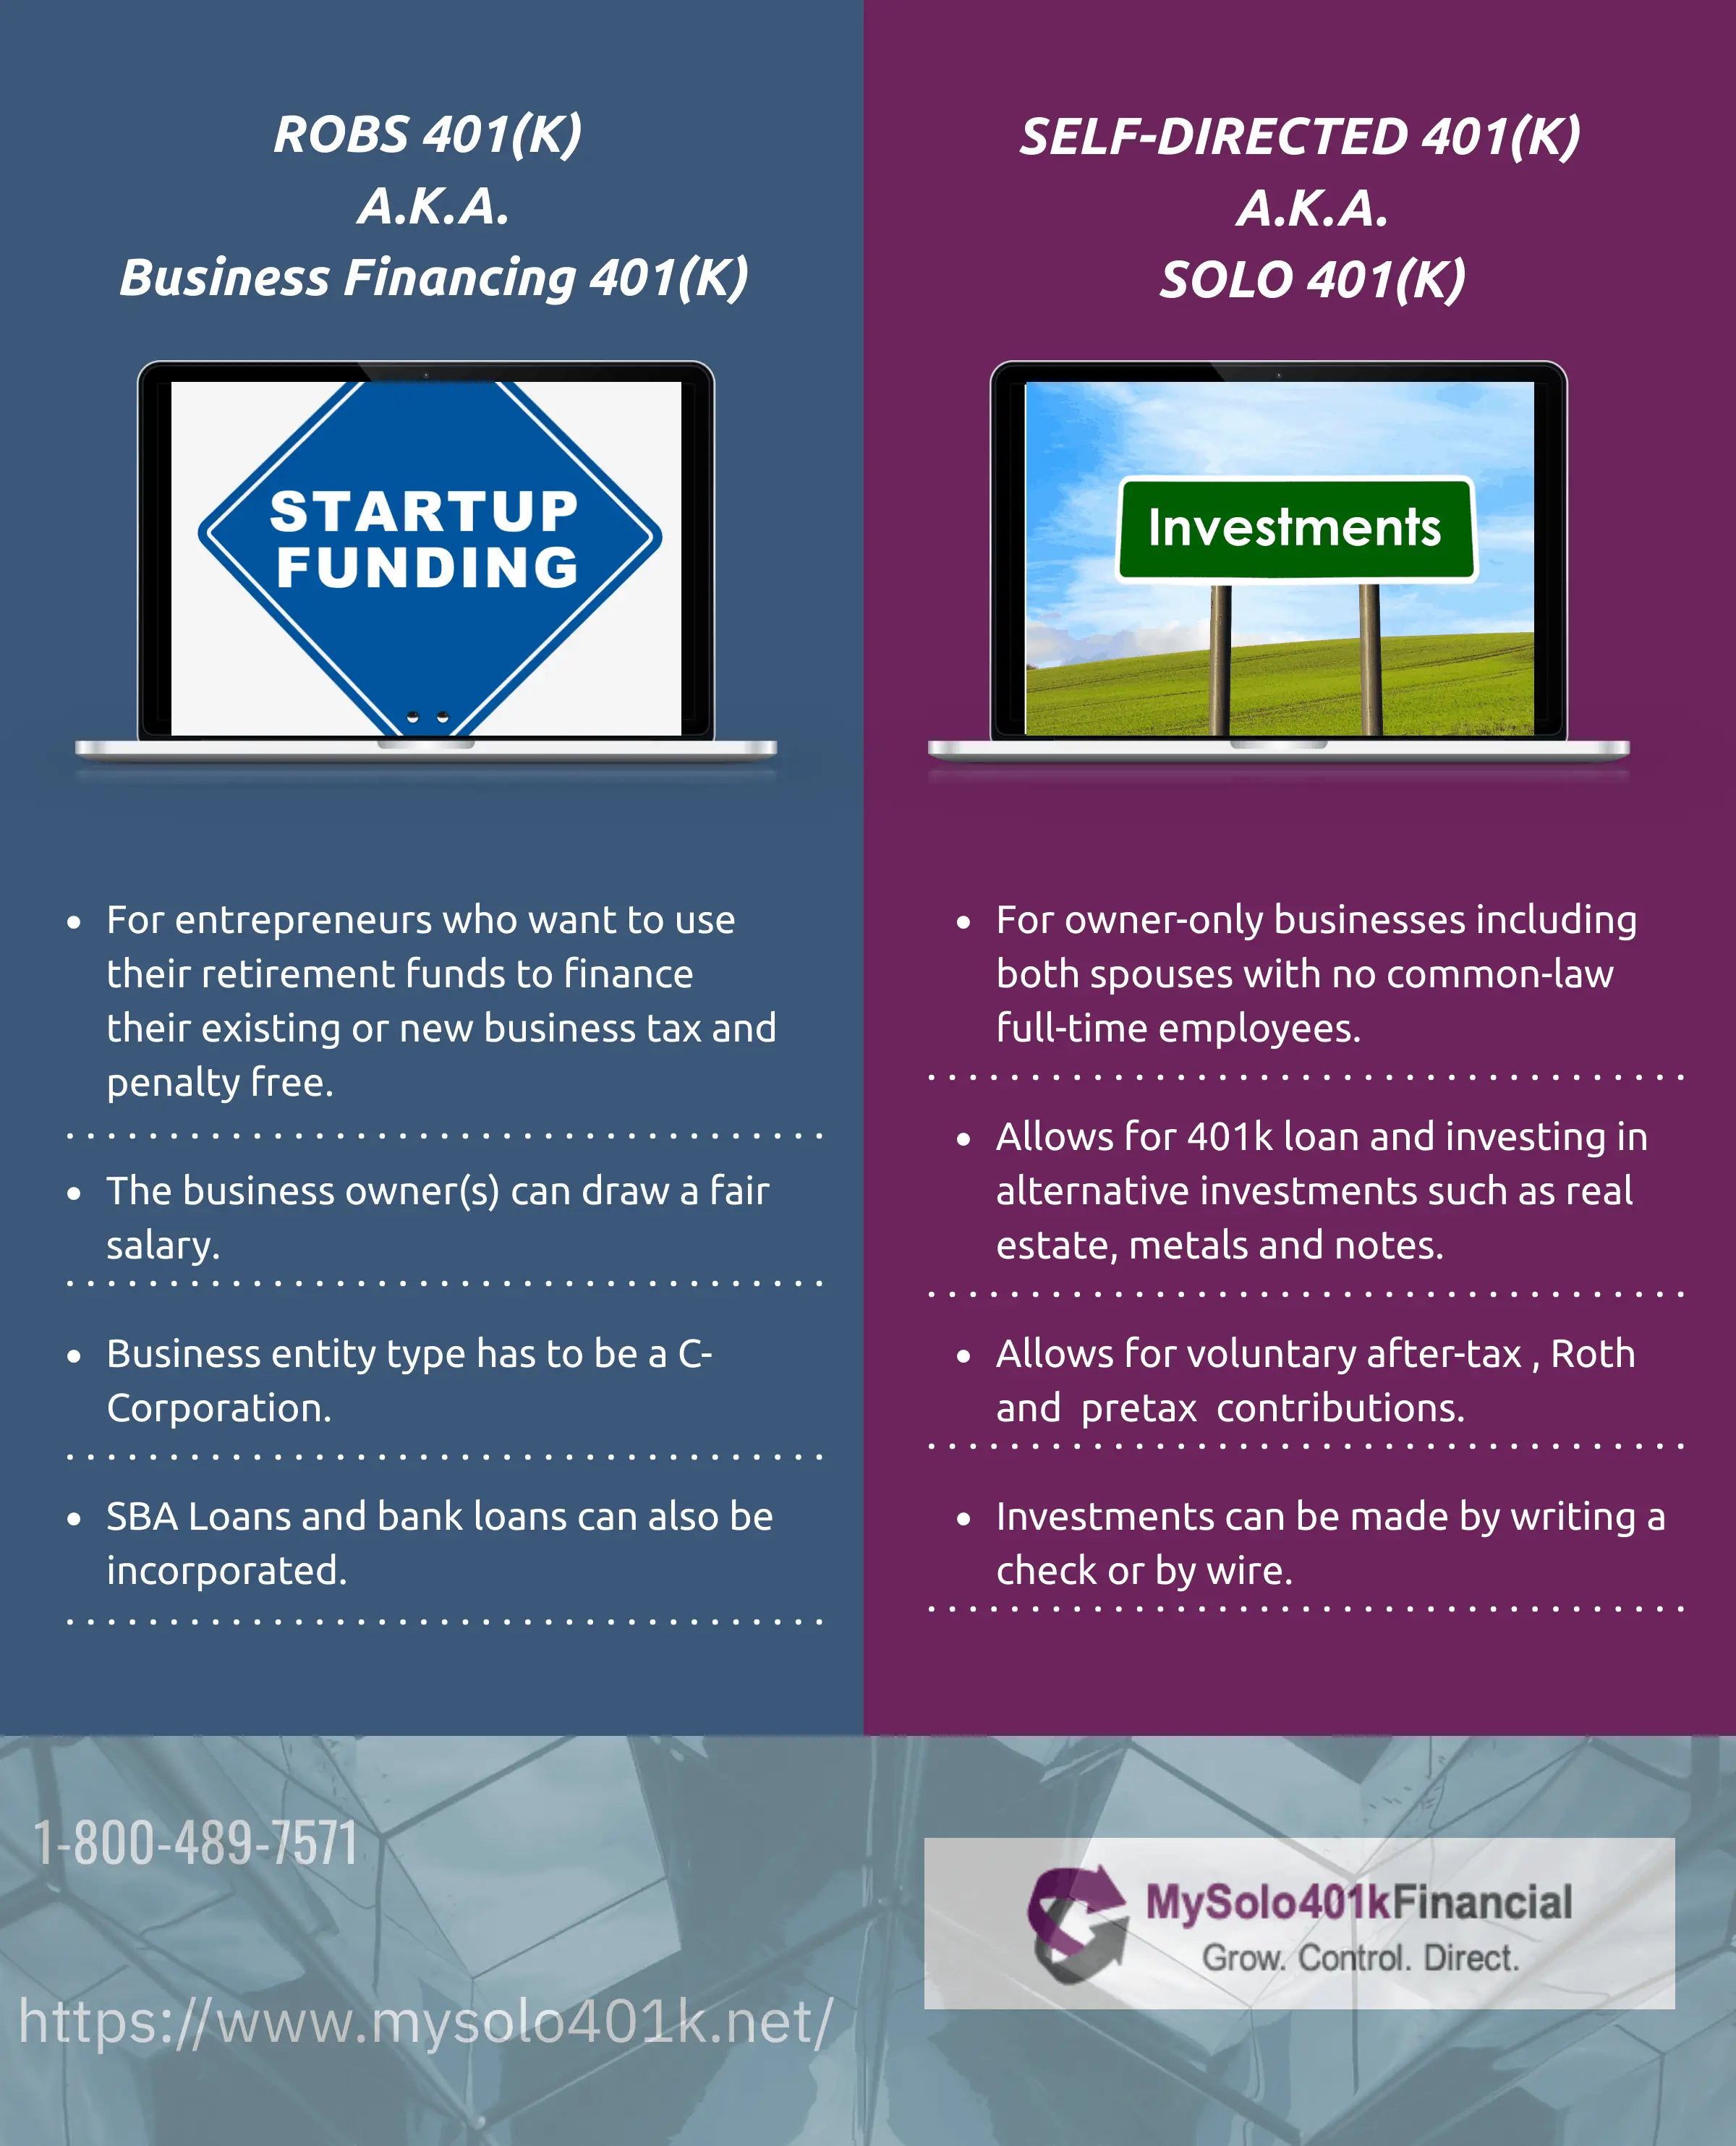 Solo 401k Eligibility Requirements vs. the ROBS 401k Financing ...